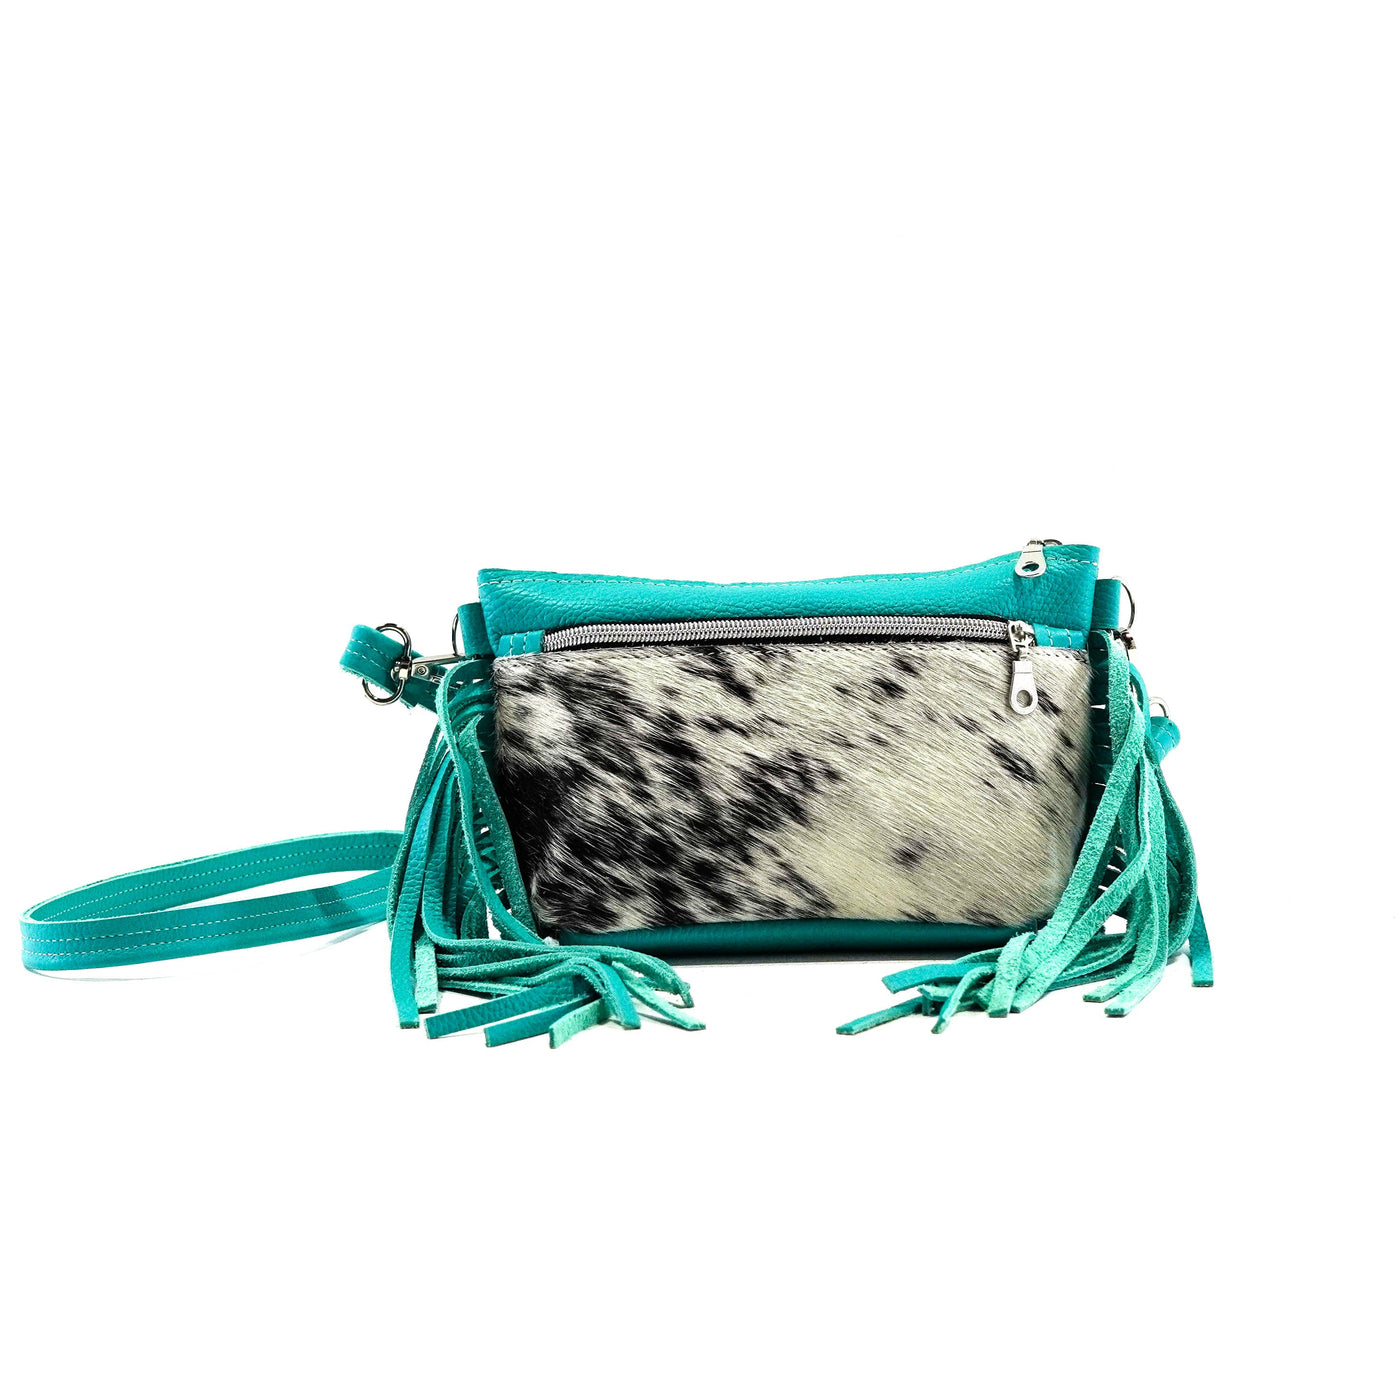 Miss Kitty - Black & White w/ Turquoise Leather-Miss Kitty-Western-Cowhide-Bags-Handmade-Products-Gifts-Dancing Cactus Designs